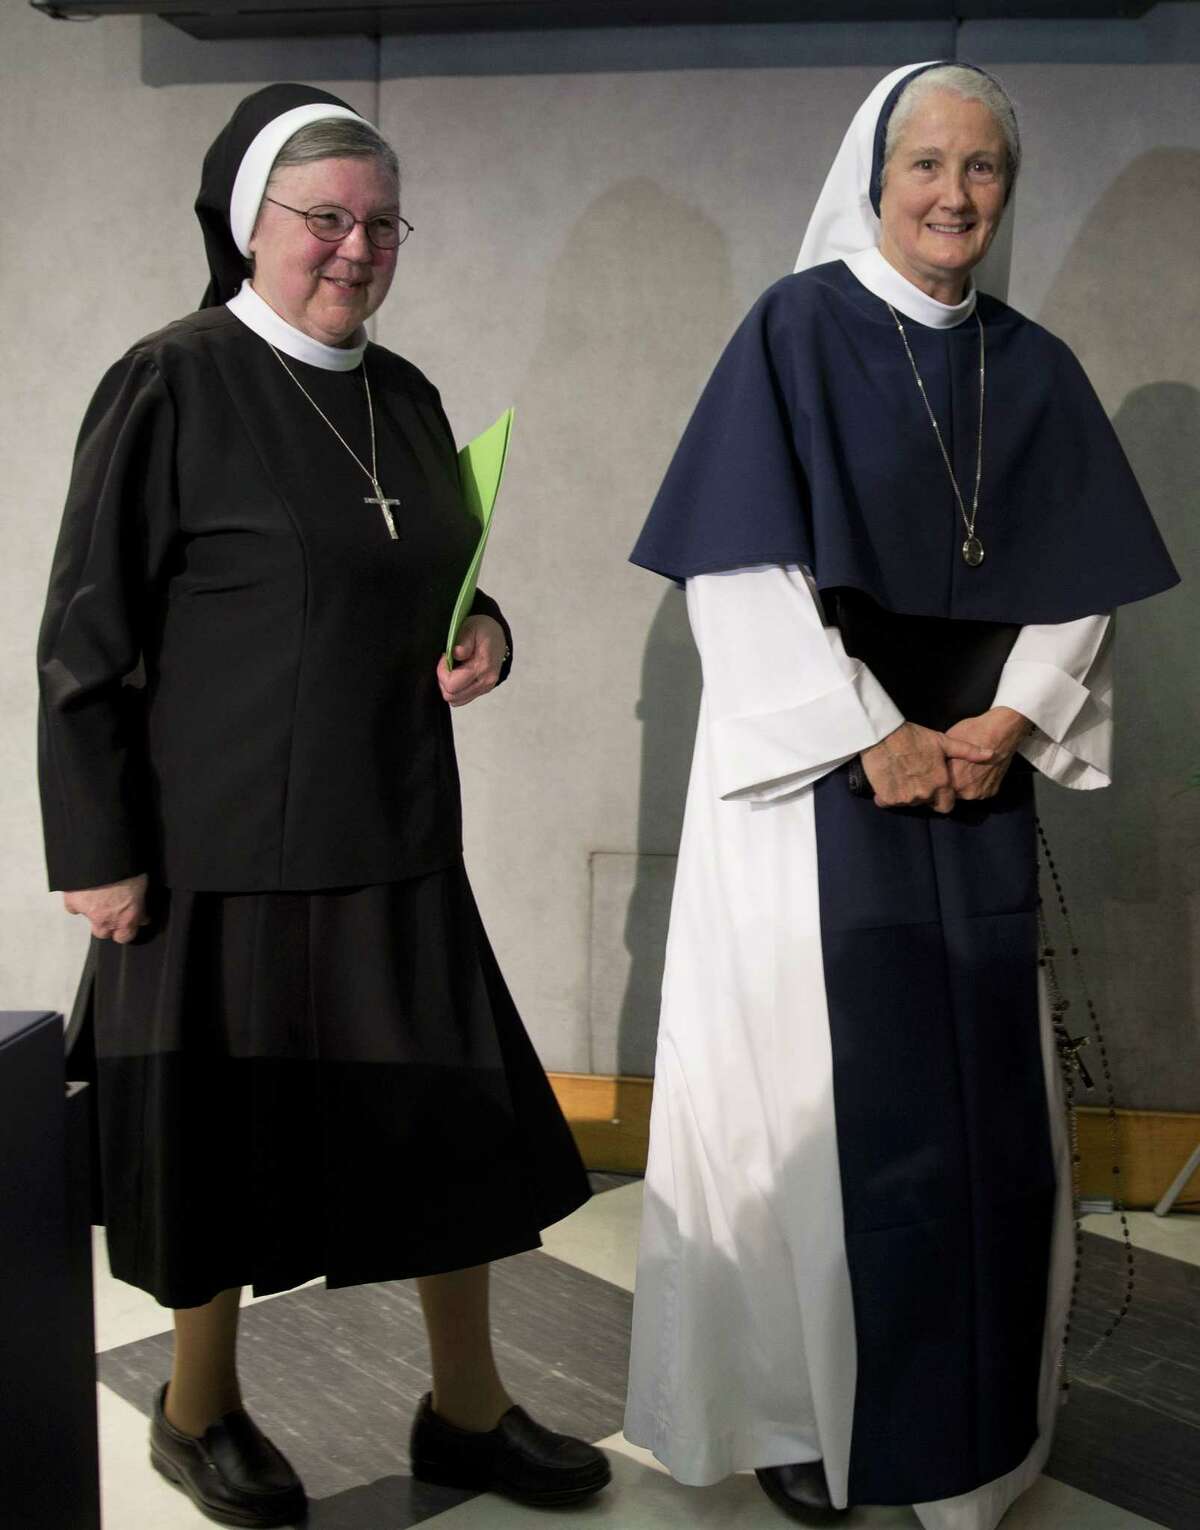 Mother Mary Clare Millea, left, and Sister Agnes Mary Donovan leave at the end of a press conference at the Vatican on Dec. 16, 2014. The Vatican went out of its way to mend fences with American religious sisters, thanking them for their selfless work caring for the poor, gently suggesting ways to survive amid a decline in numbers and promising to value their “feminine genius” more.